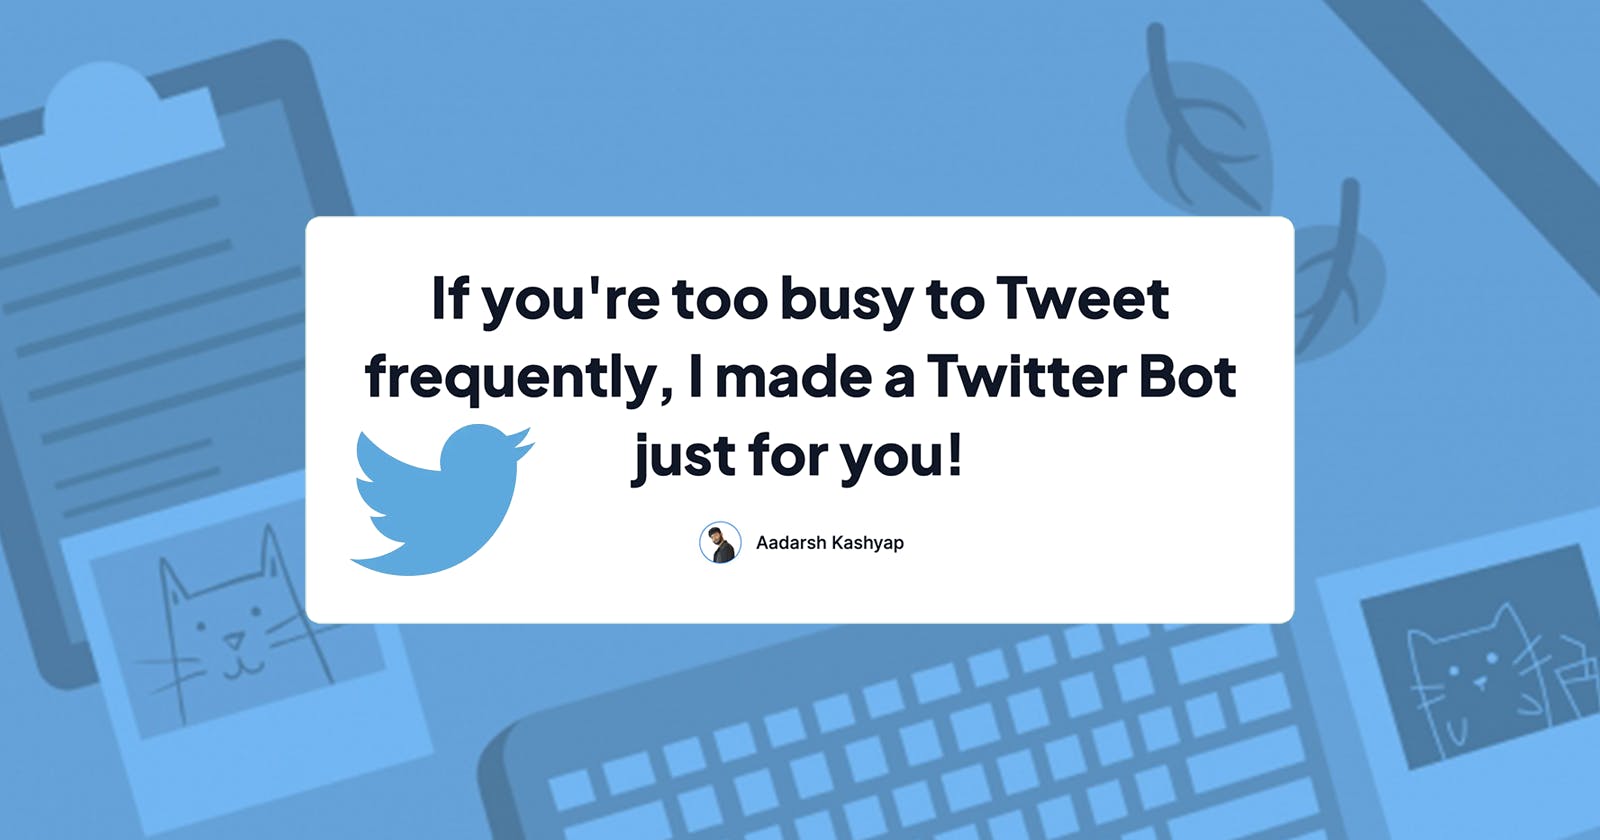 If you're too busy to Tweet frequently, I made a Twitter Bot just for you!